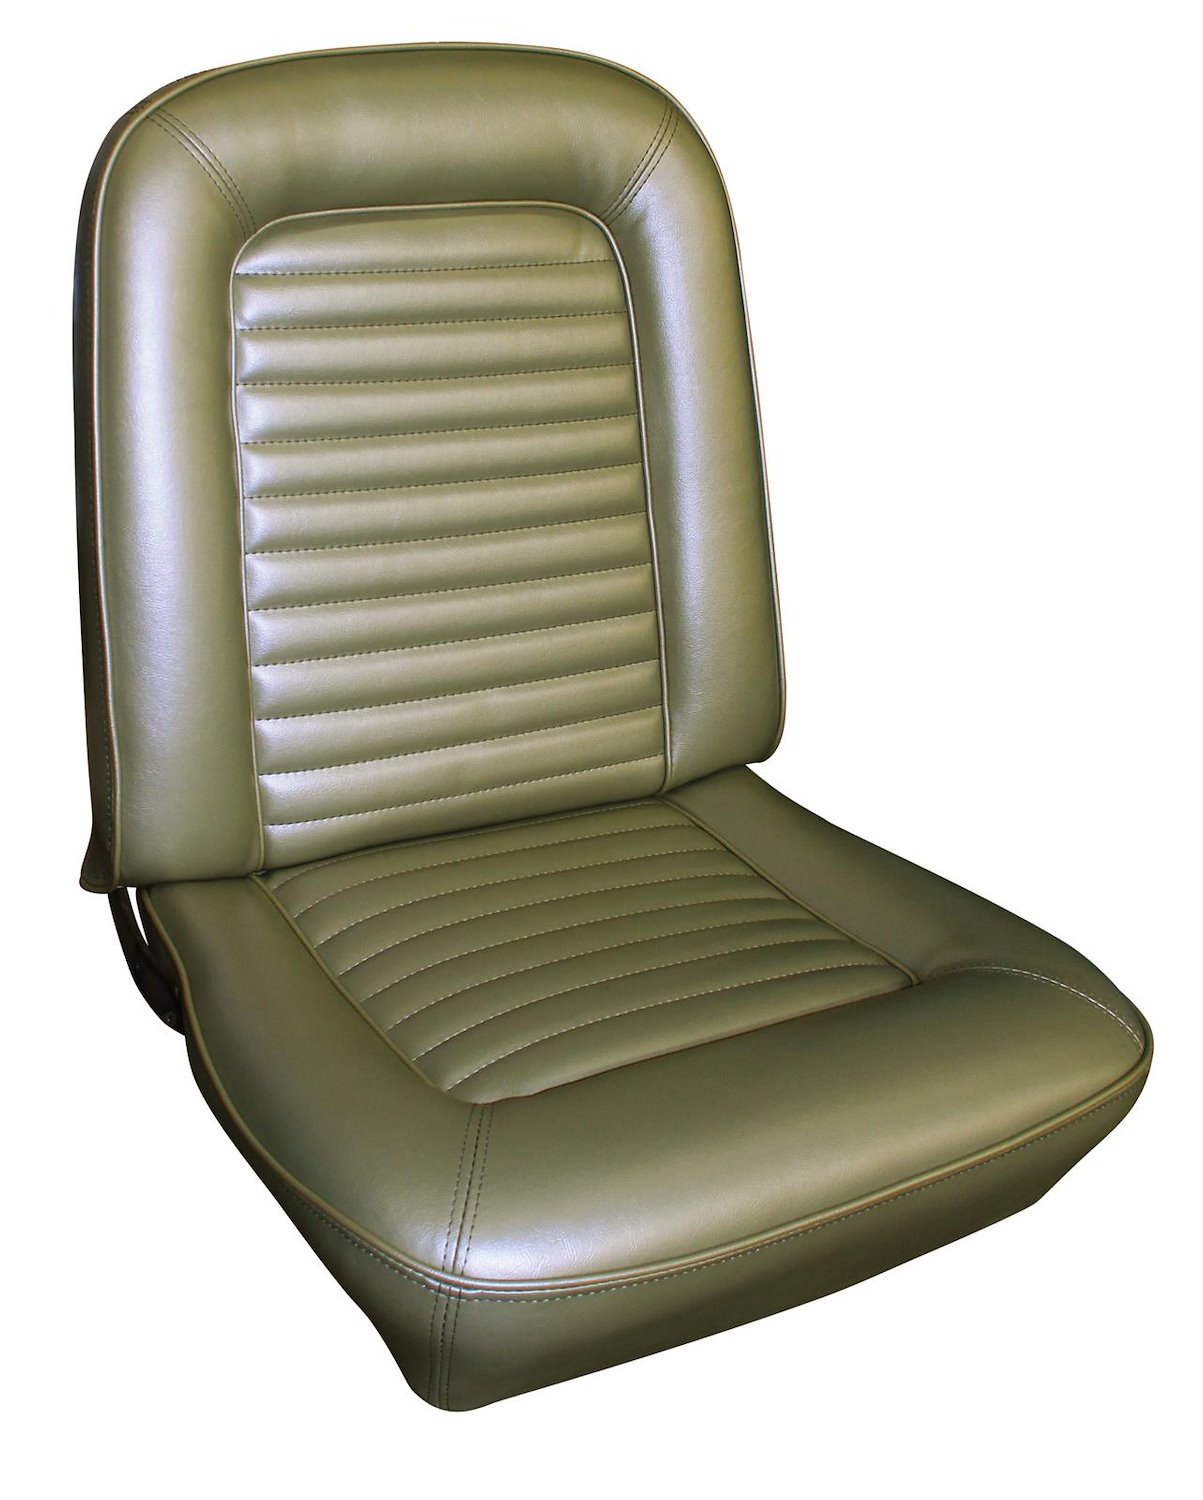 1968 Ford Mustang Deluxe Interior Front Bucket Seat